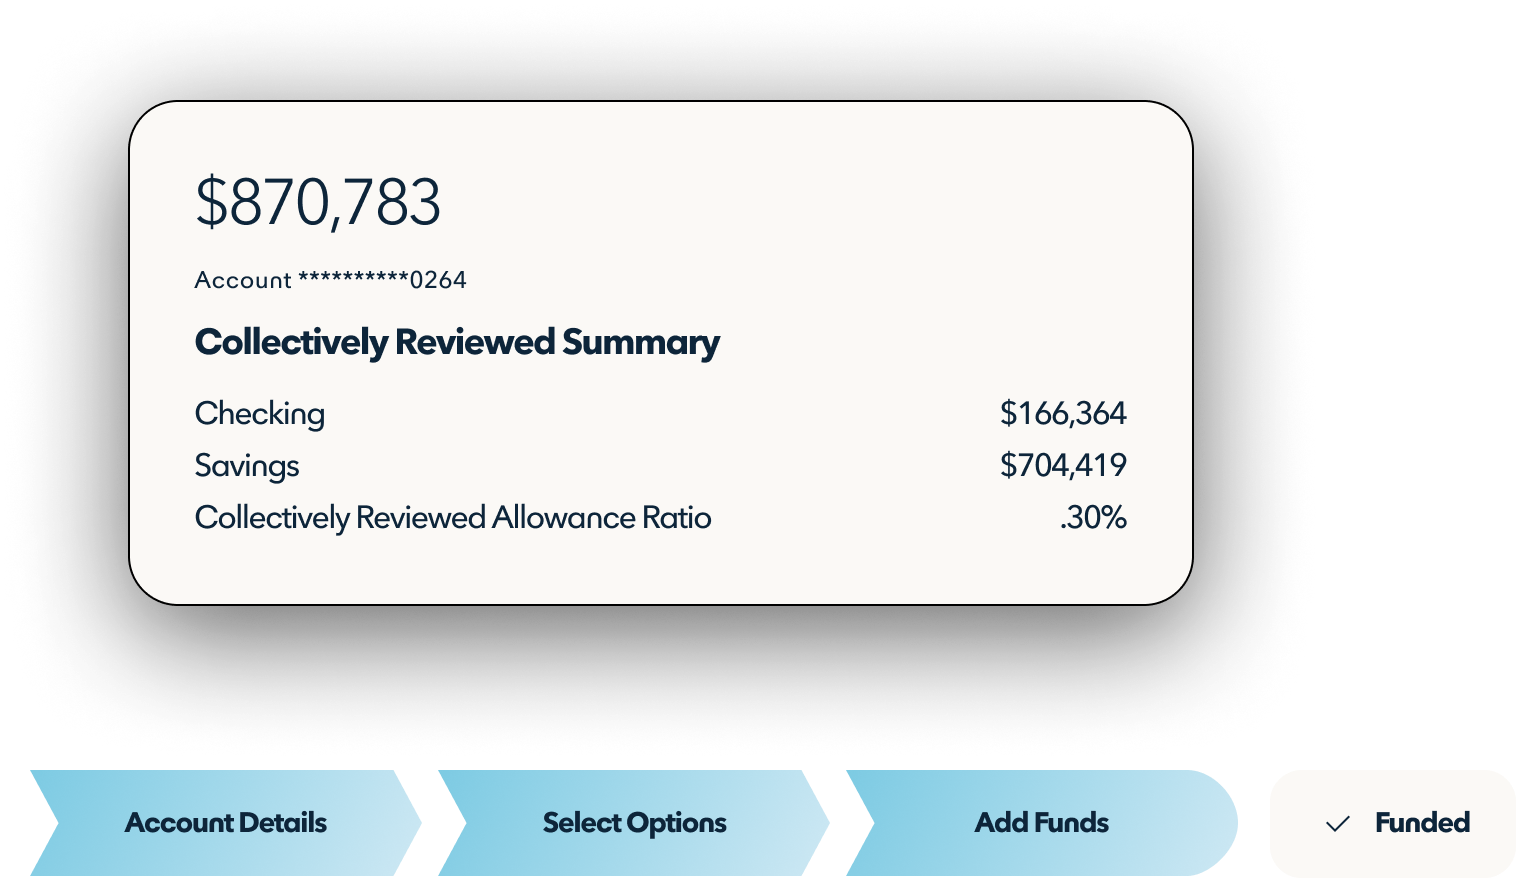 A section of the customer onboarding review summary hovers over a light blue progress bar that indicates the account is funded. 